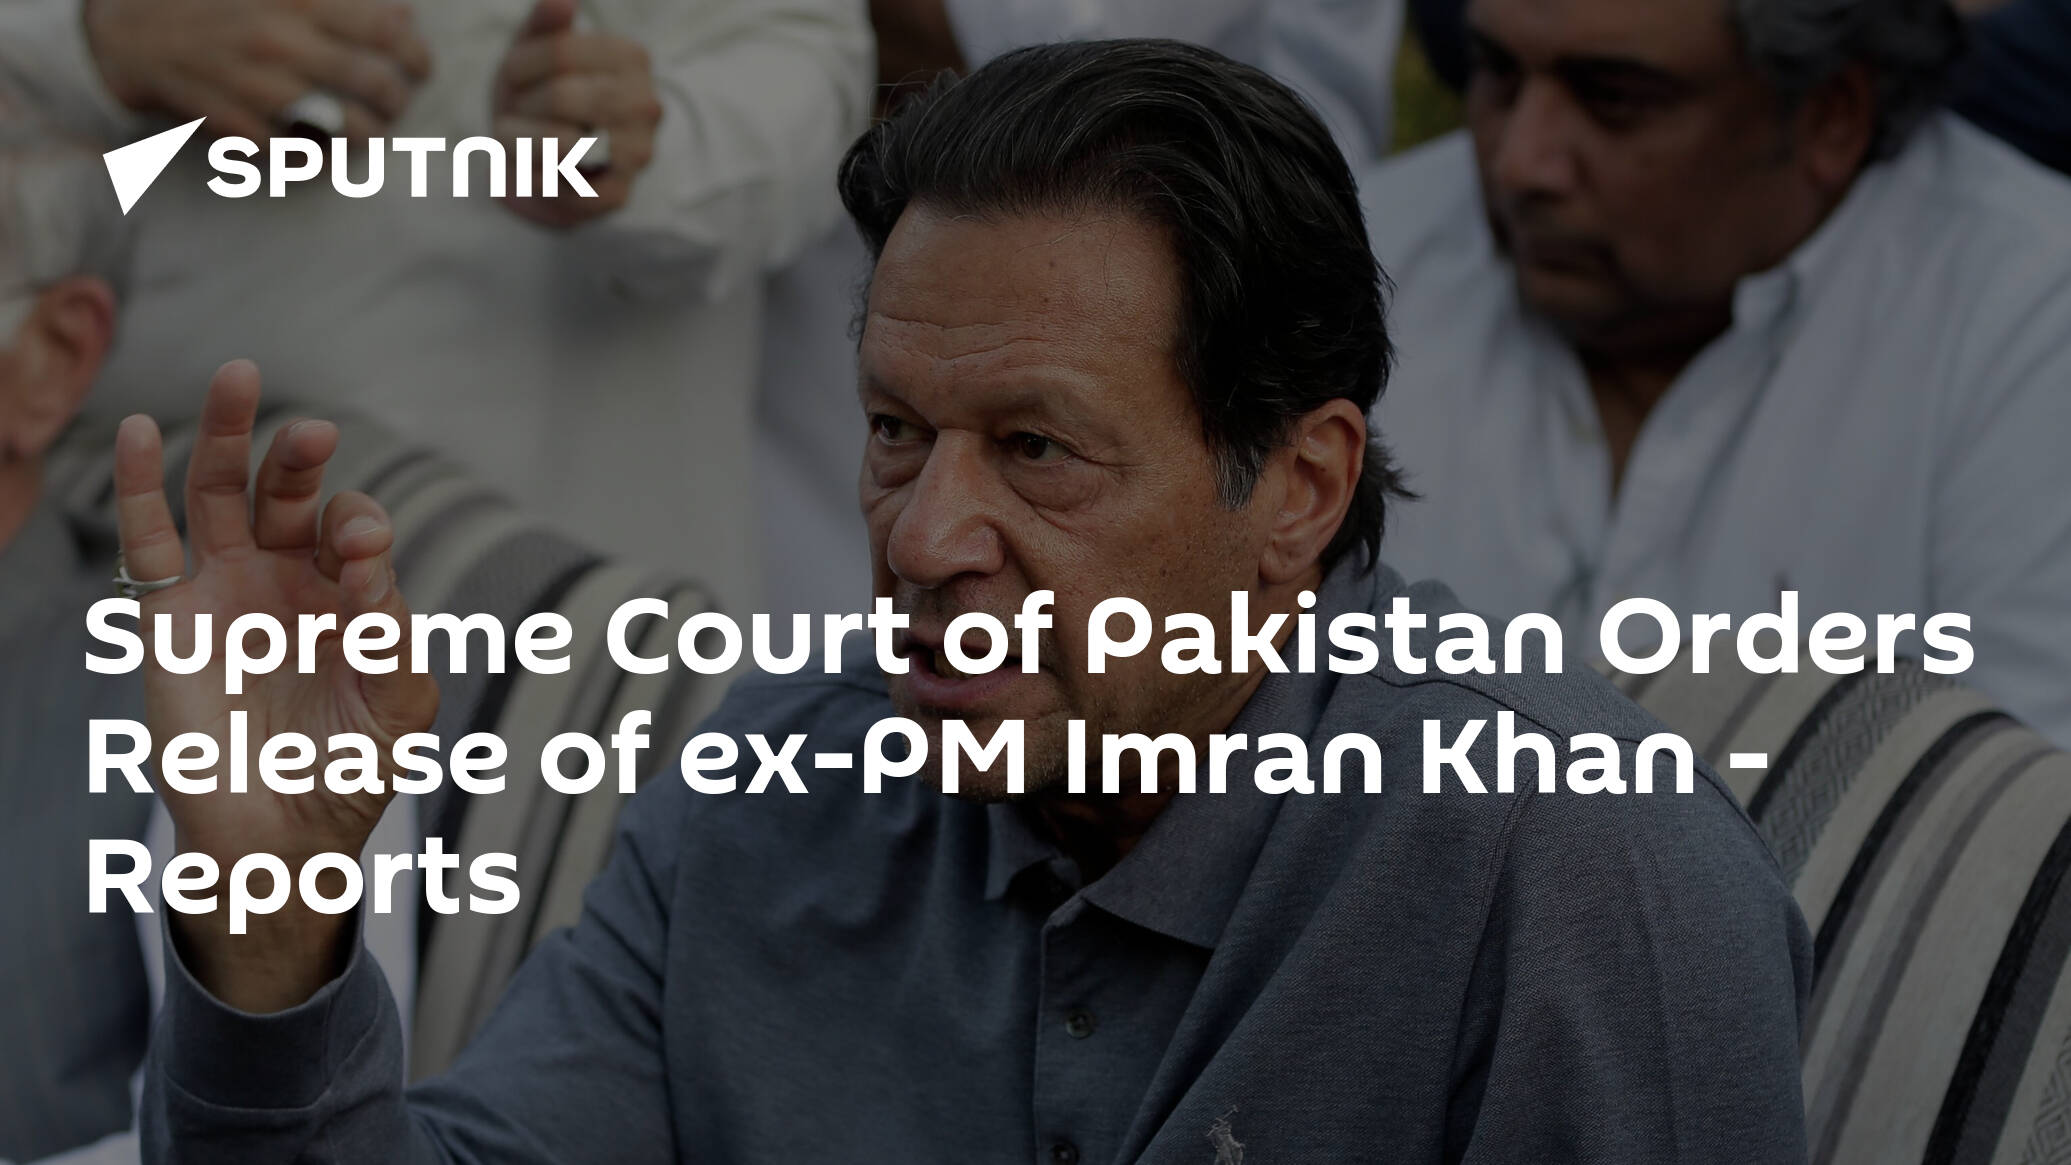 Supreme Court of Pakistan Orders Release of ex-PM Imran Khan – Reports